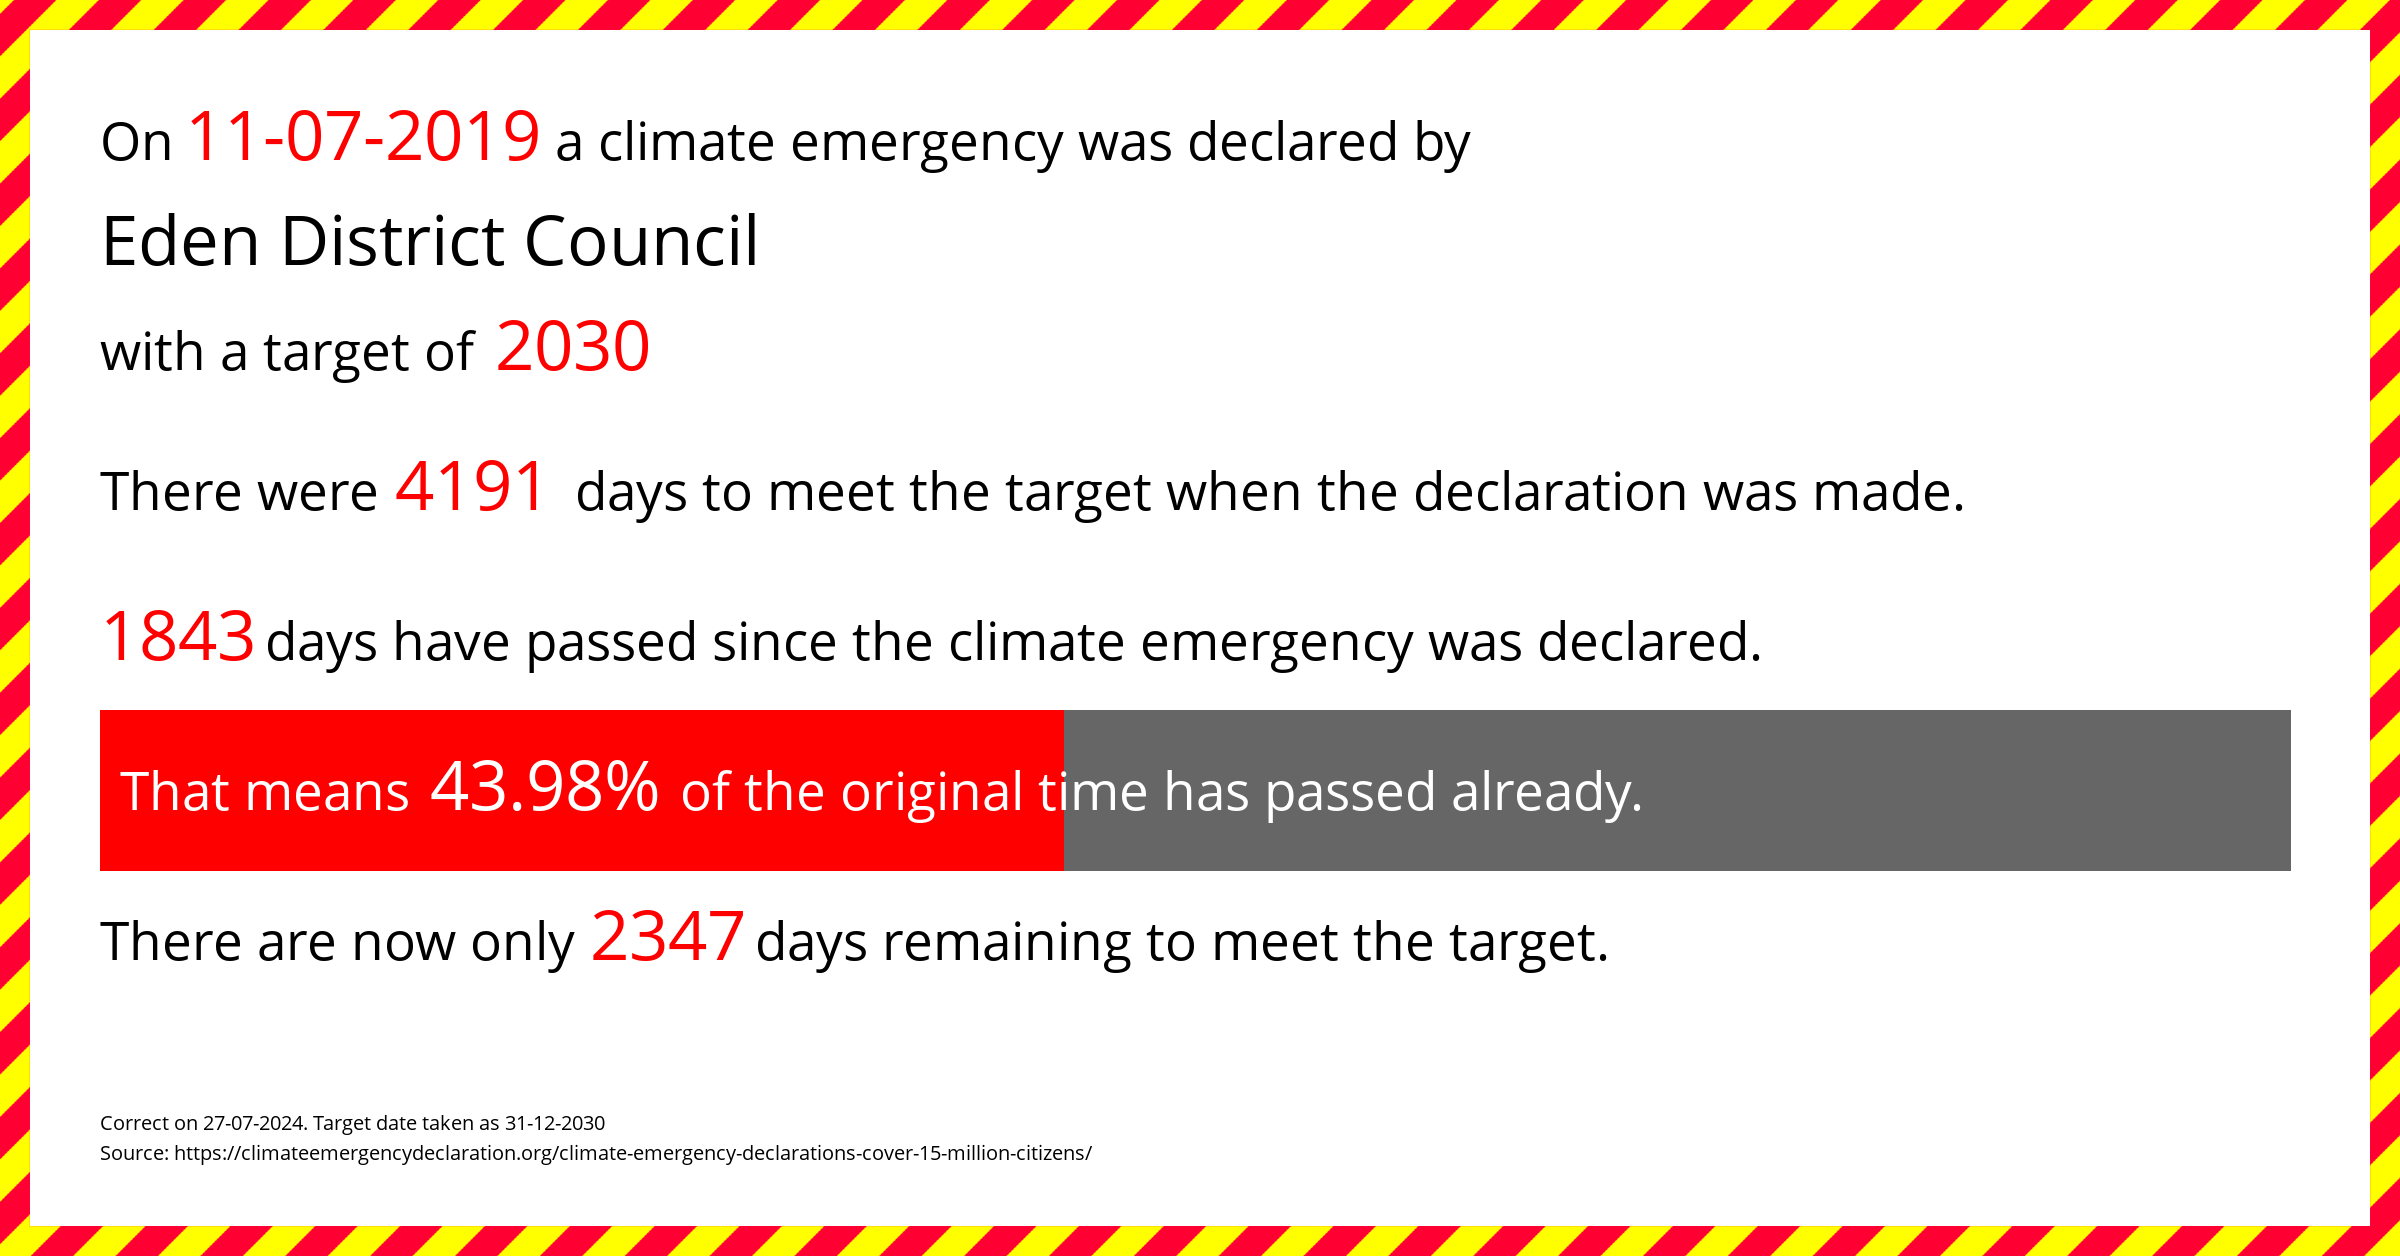 Eden District Council declared a Climate emergency on Thursday 11th July 2019, with a target of 2030.